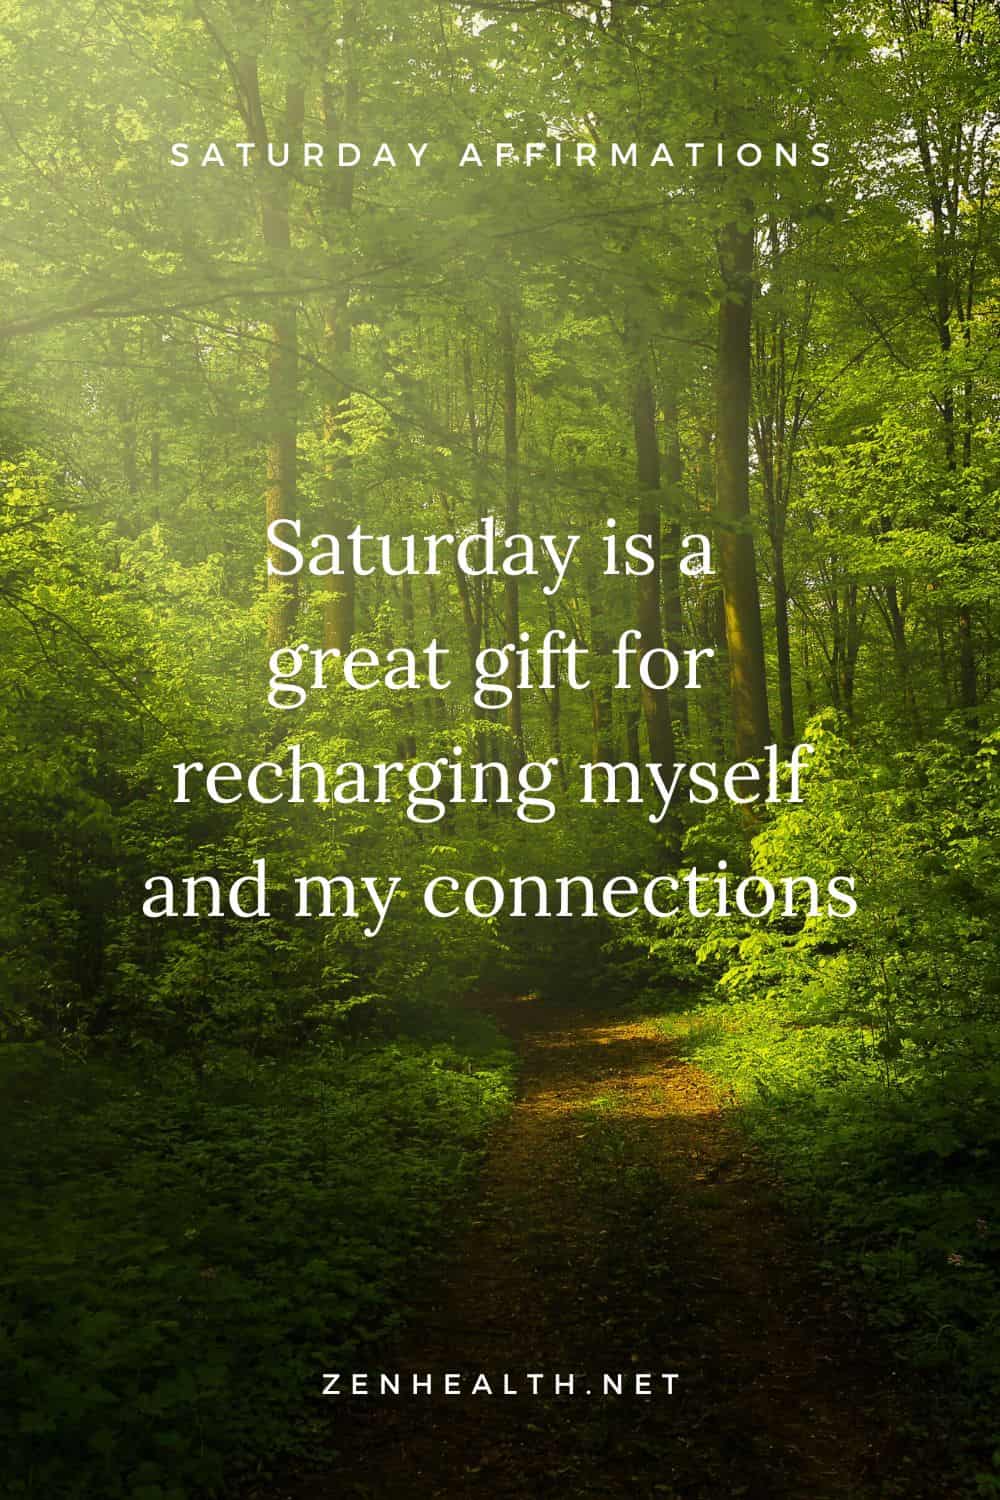 Saturday affirmations: Saturday is a great gift for recharging myself and my connections